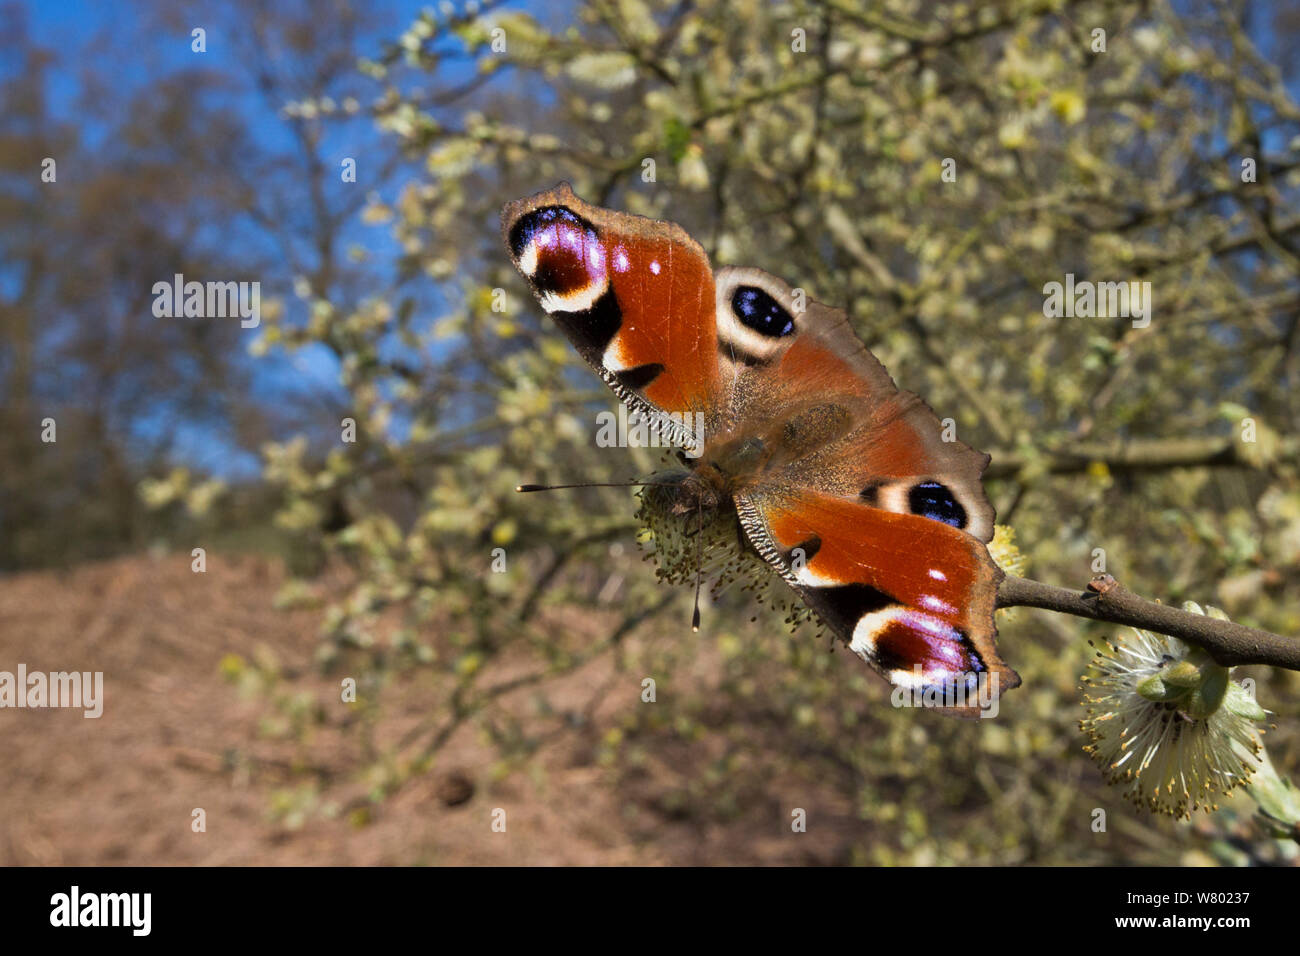 Peacock butterfly (Inachis io) feeding on Goat Willow catkins (Salix caprea), an important food source for pollinators in early spring. Peak District National Park, UK. April. Stock Photo